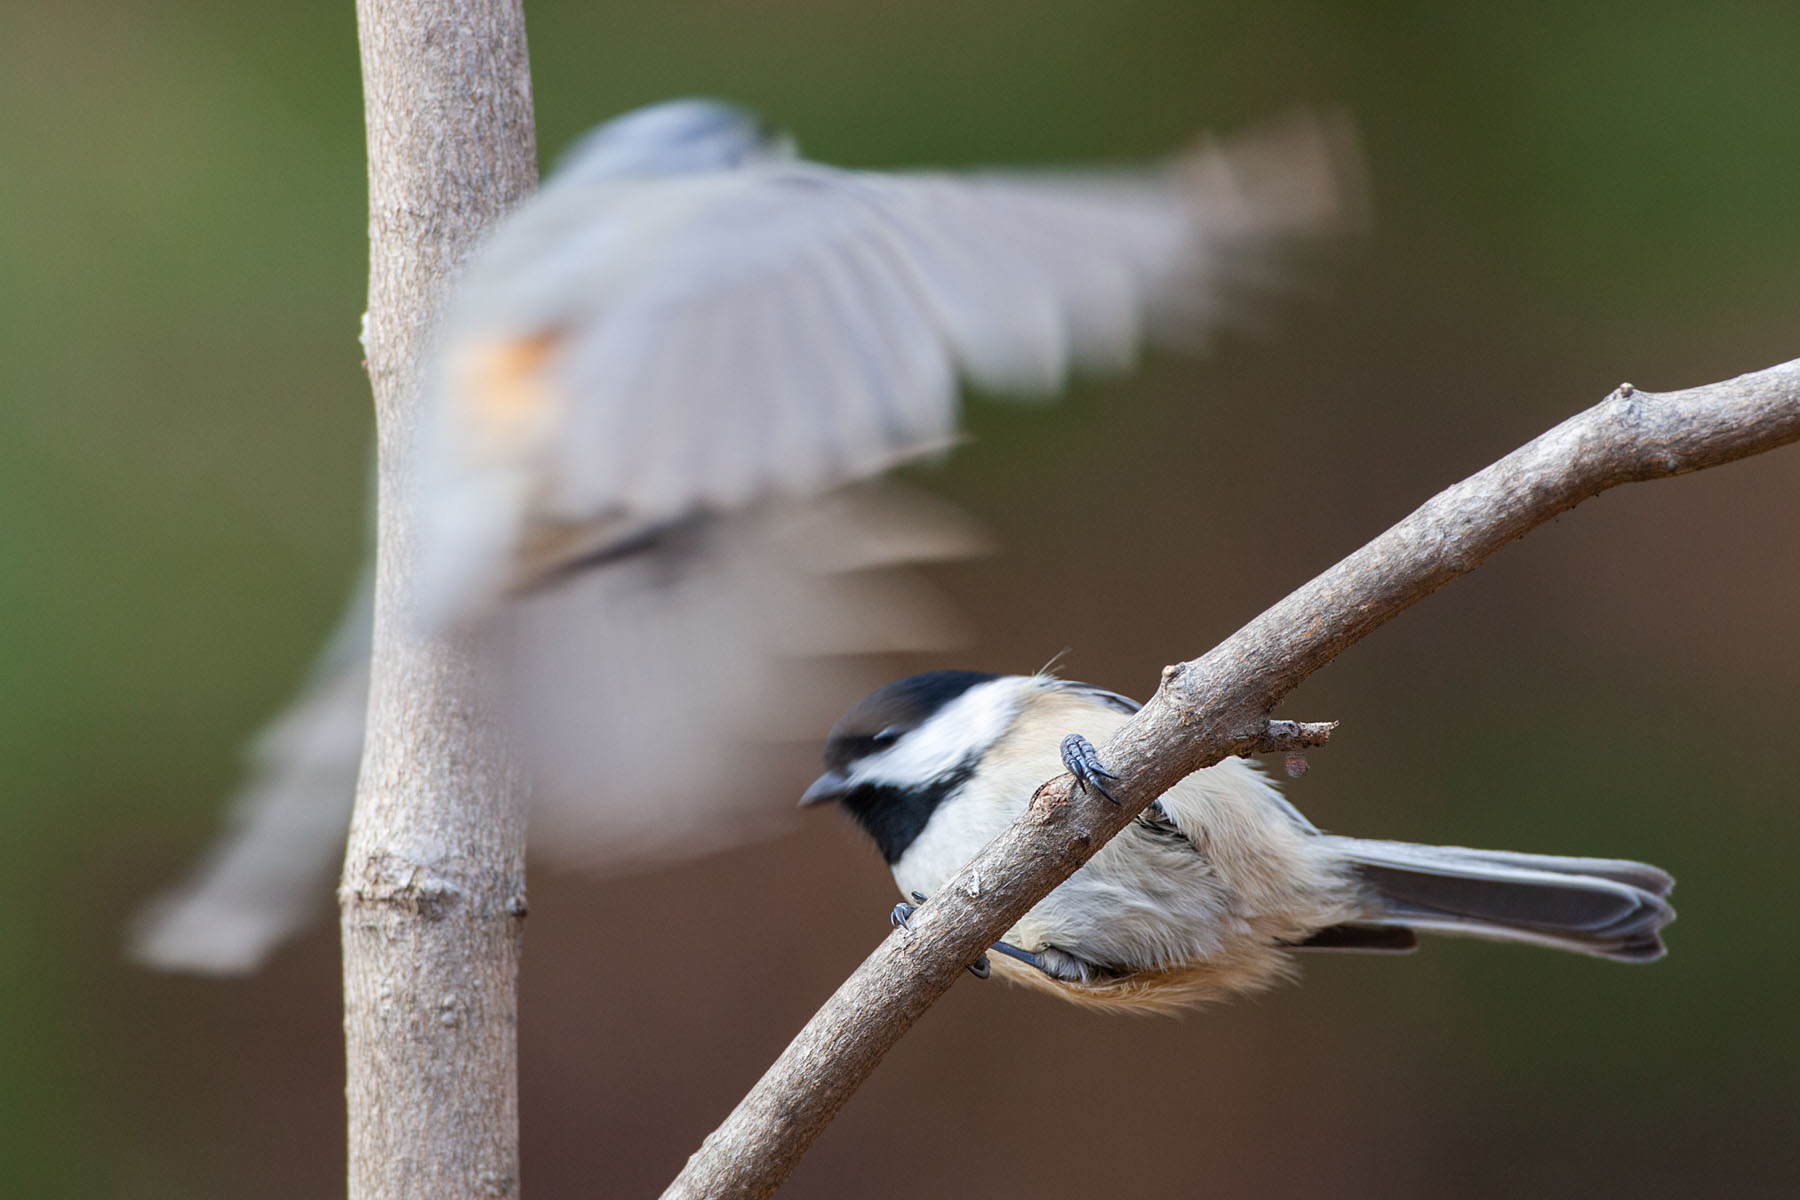 A shutter speed of 1/250 is quick enough to get a chickadee sitting on a branch, but not nearly fast enough to freeze a tufted titmouse thinking about landing on the same branch.  Click for next photo.